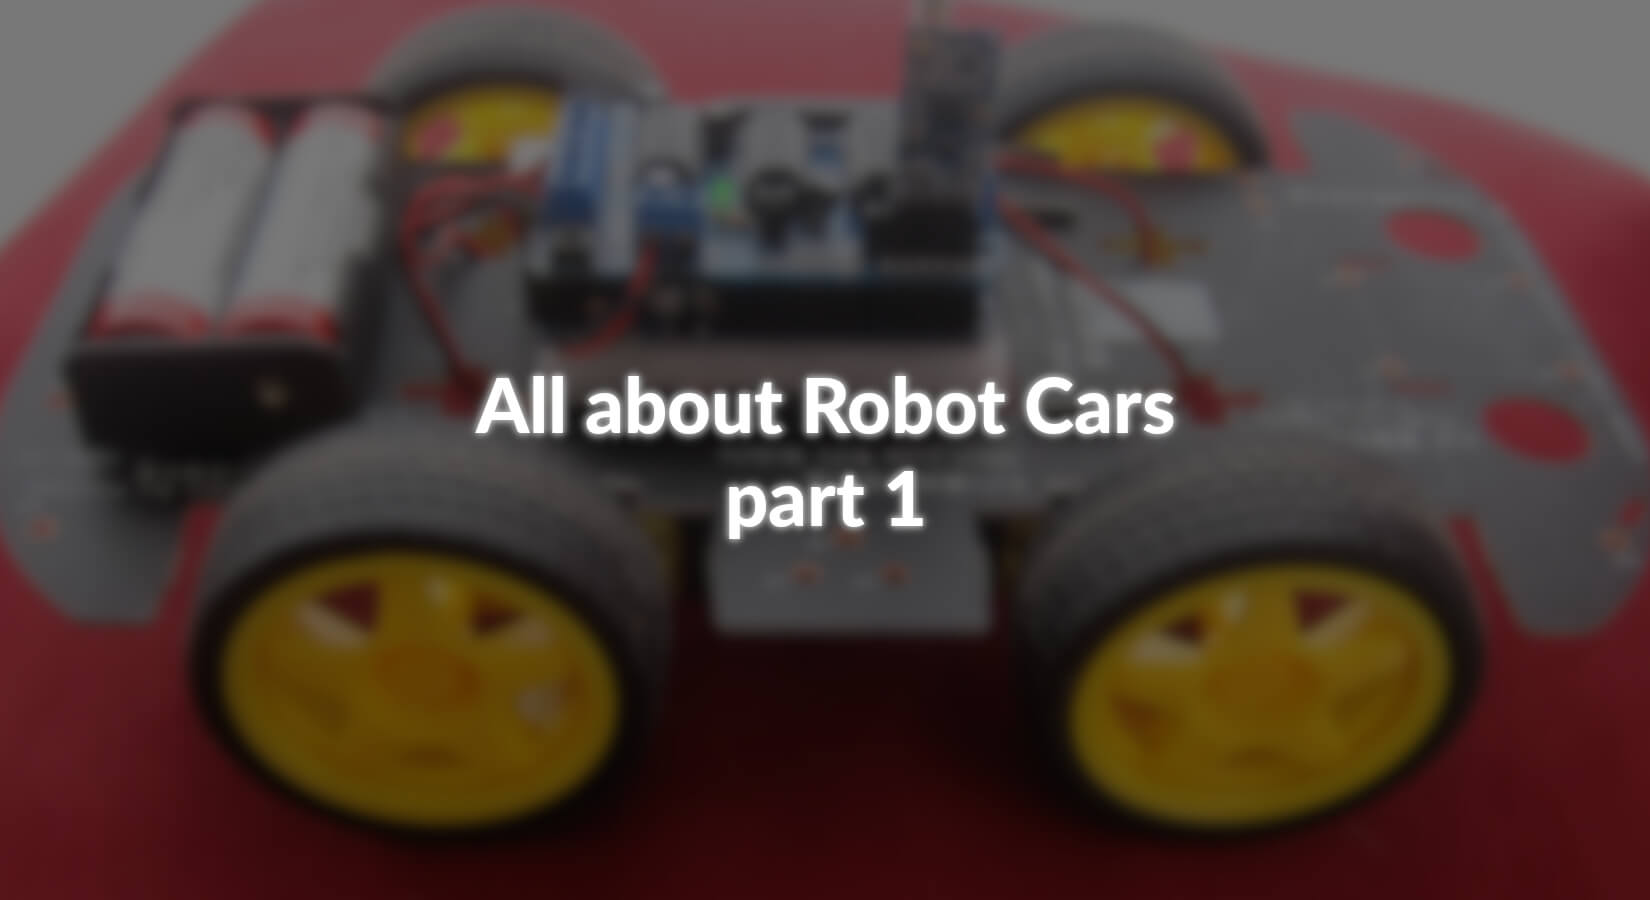 All about Robot Cars - part 1 - AZ-Delivery